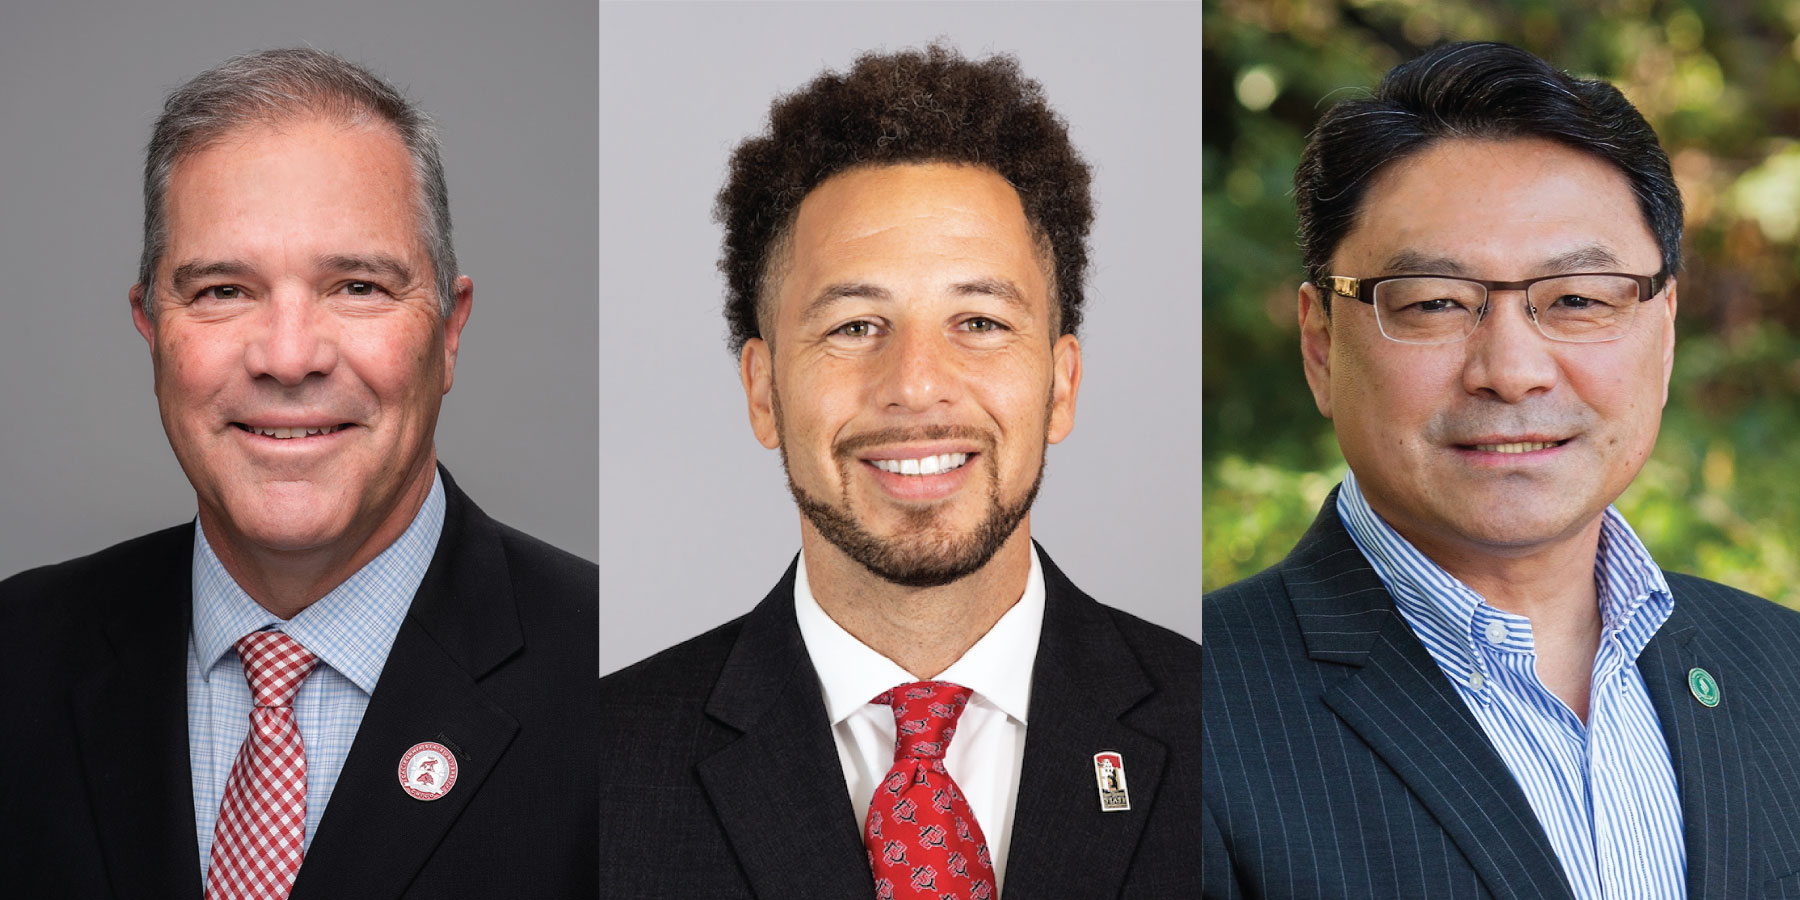 From left to right: Stephen Perez, J. Luke Wood, and Ming-Tung "Mike" Lee, smiling in profile photos that are side by side.